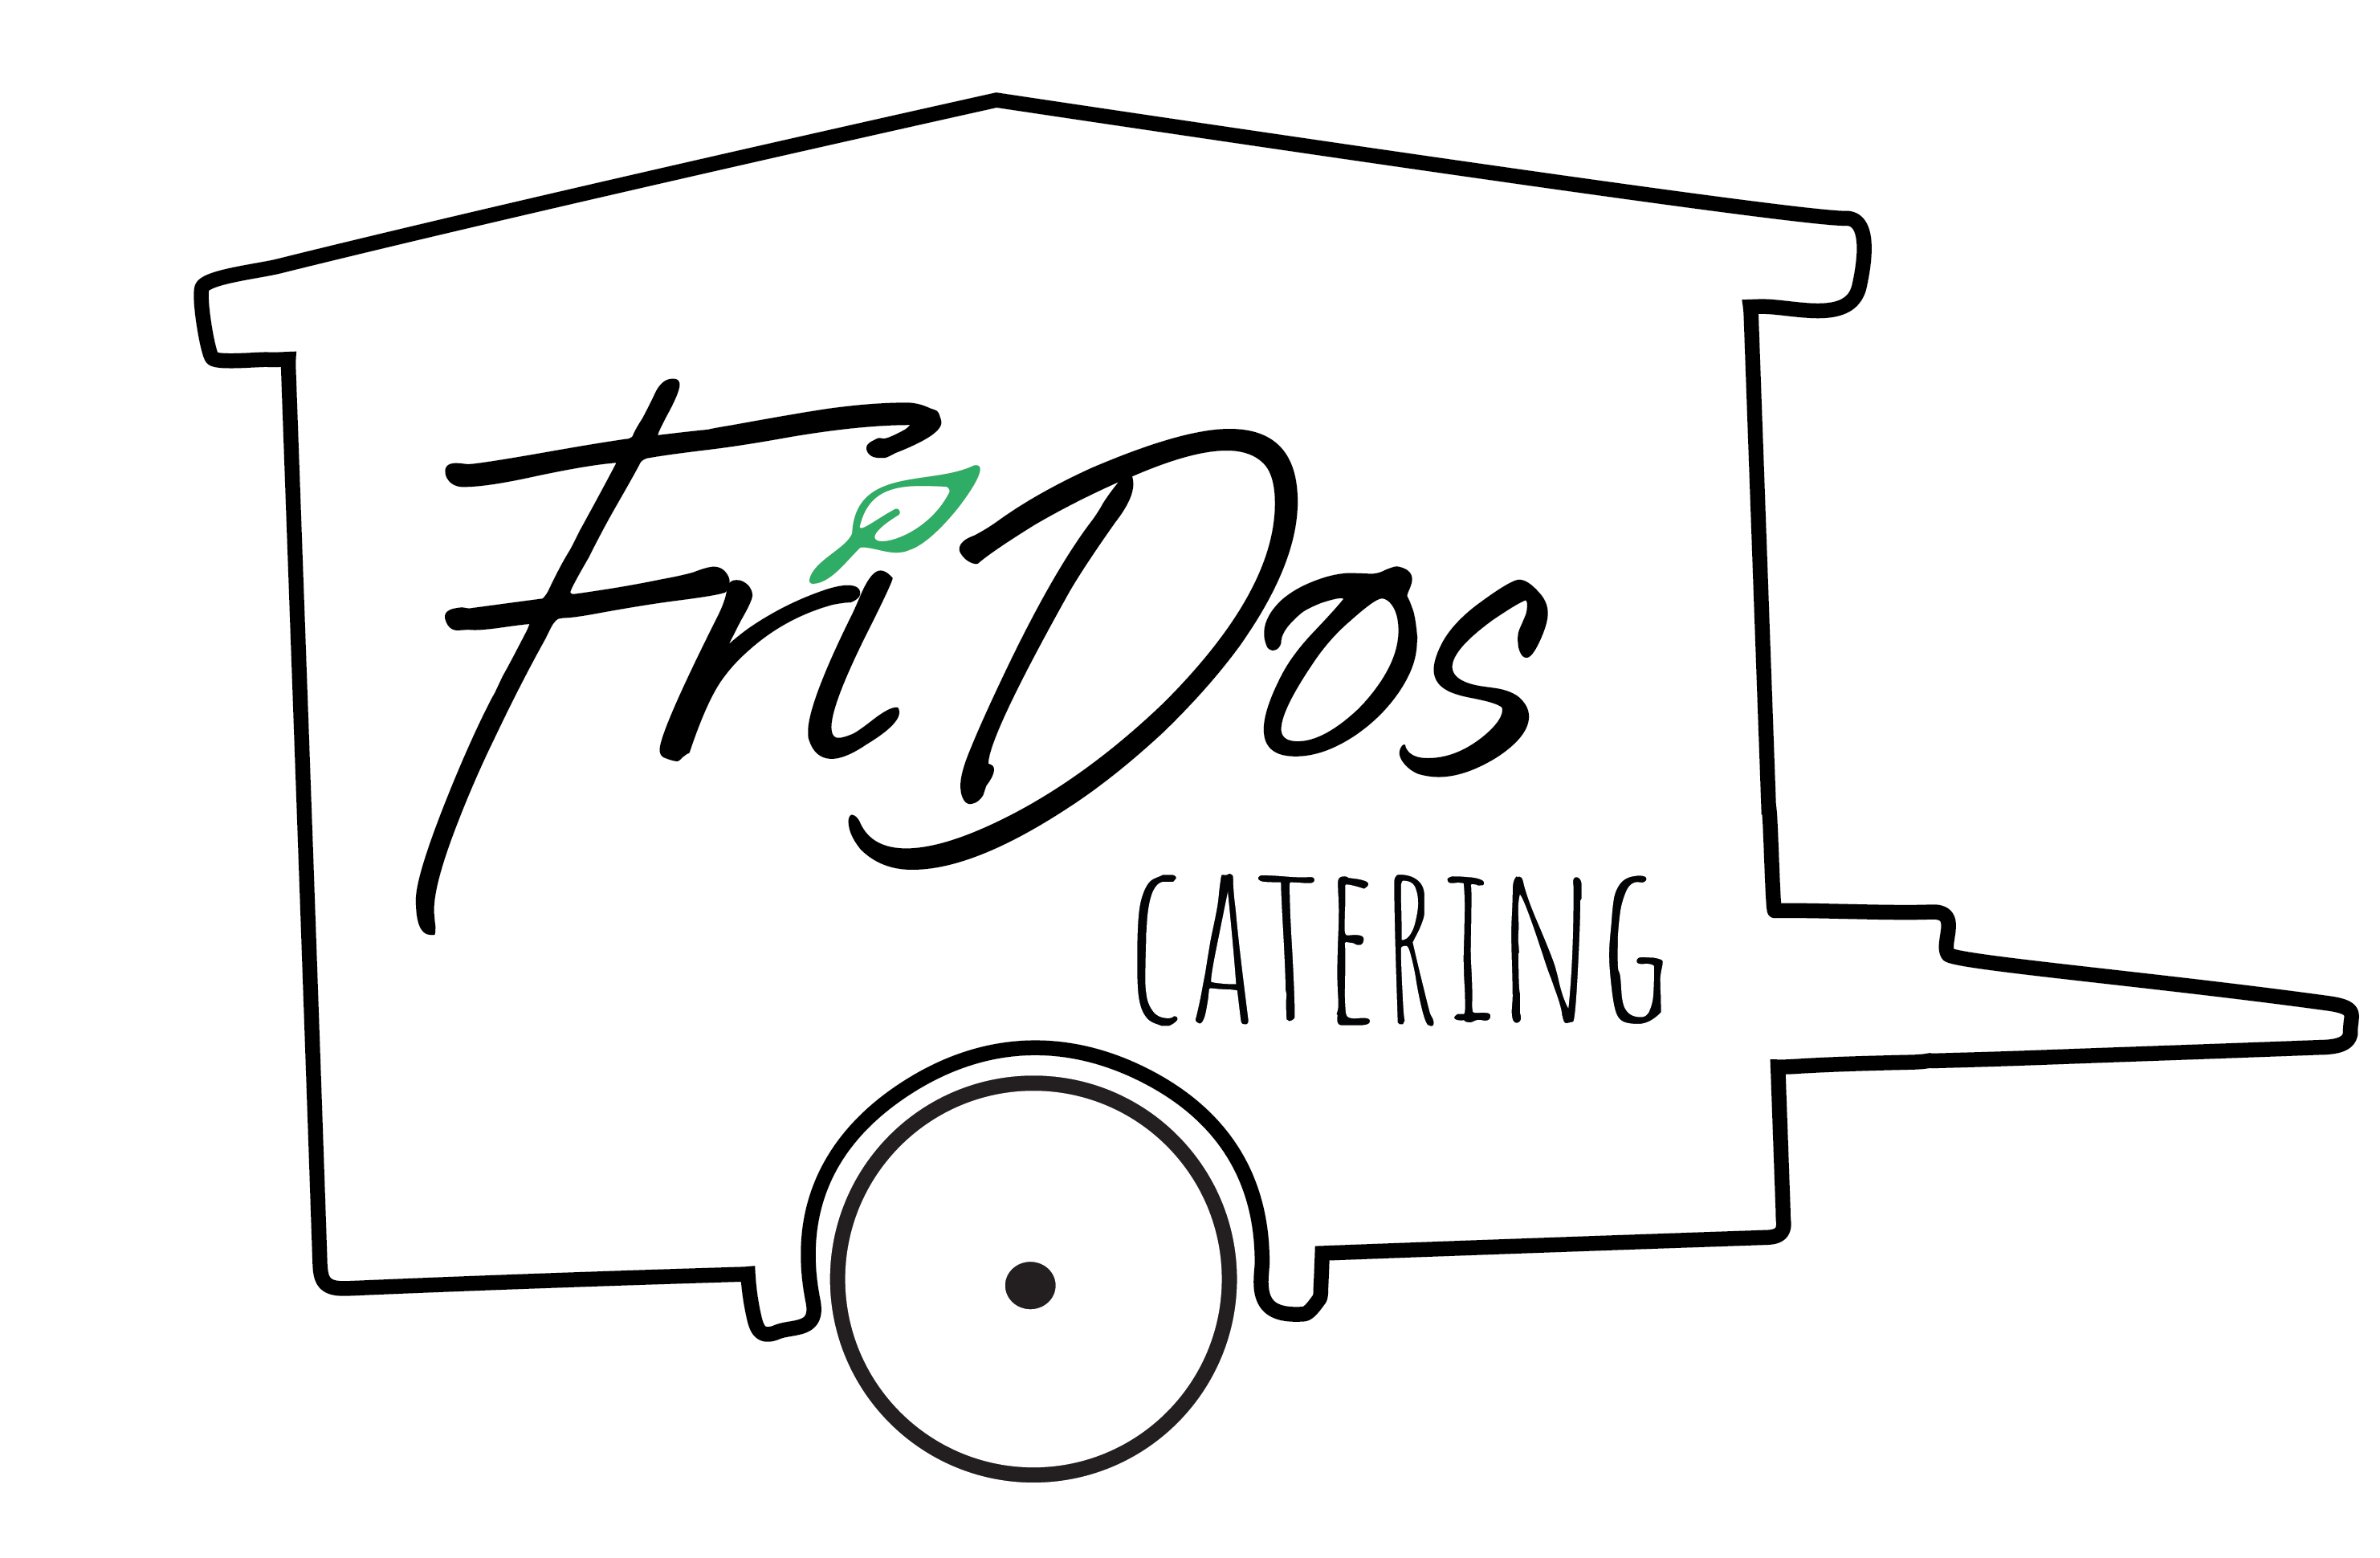 FriDos Events und Catering